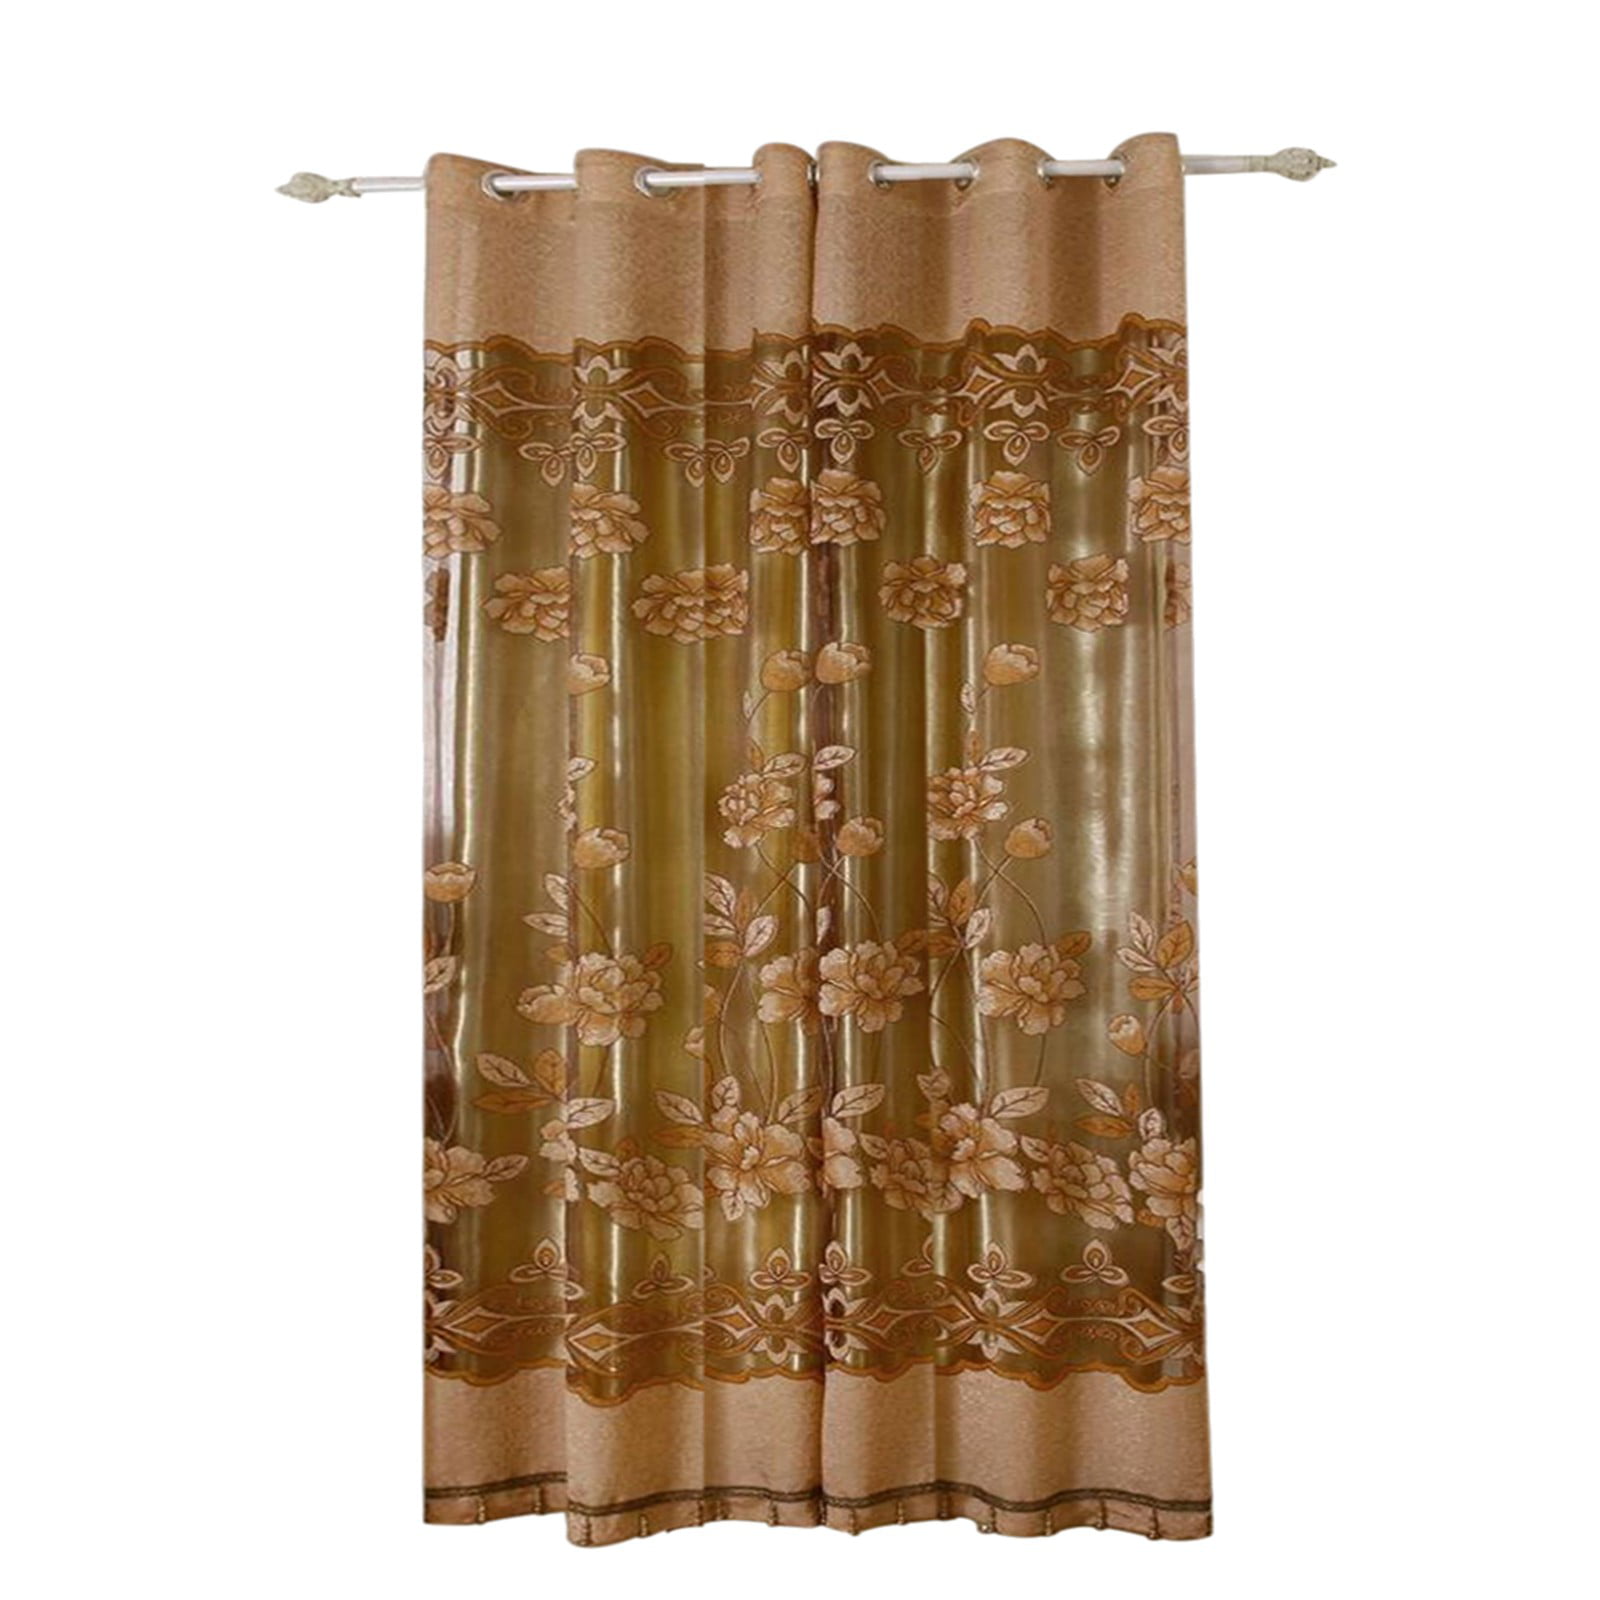 WYE Delicate Embroidered Semi Sheer Curtains European Living Room Floral Voile Luxury Brown Tulle Rod Pocket Top Window Treatment Coffee Drape Panels for Sliding Glass Door 1 Panel 42W x 95L Inch